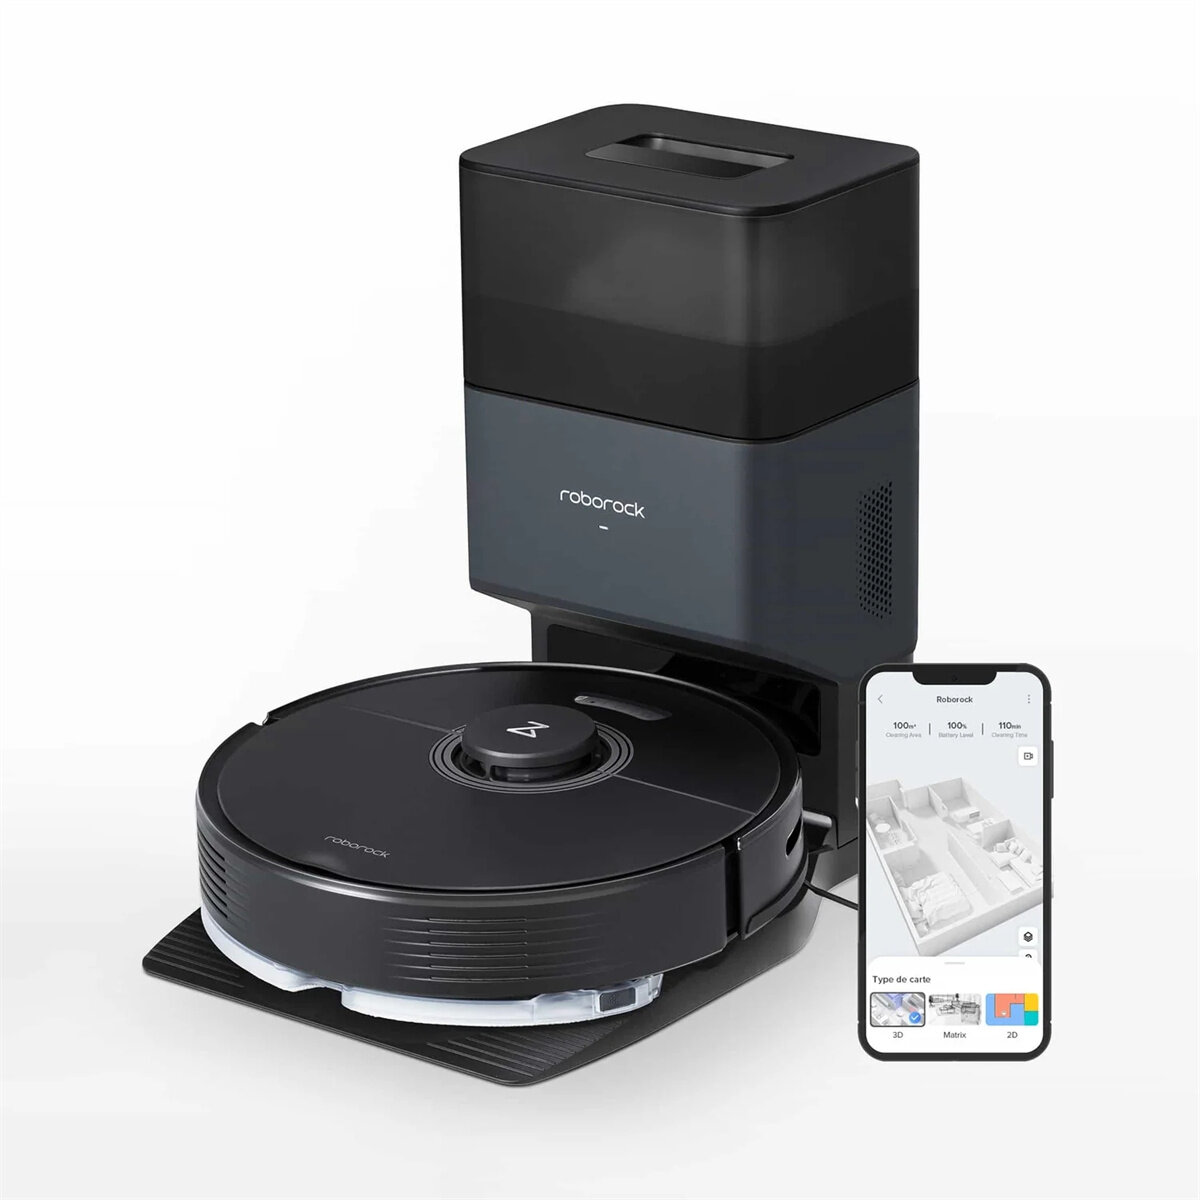 Roborock Q7 Max+ Wi-Fi Connected Robot Vacuum and Mop with Auto-Empty Dock Pure, APP-Controlled Mopping